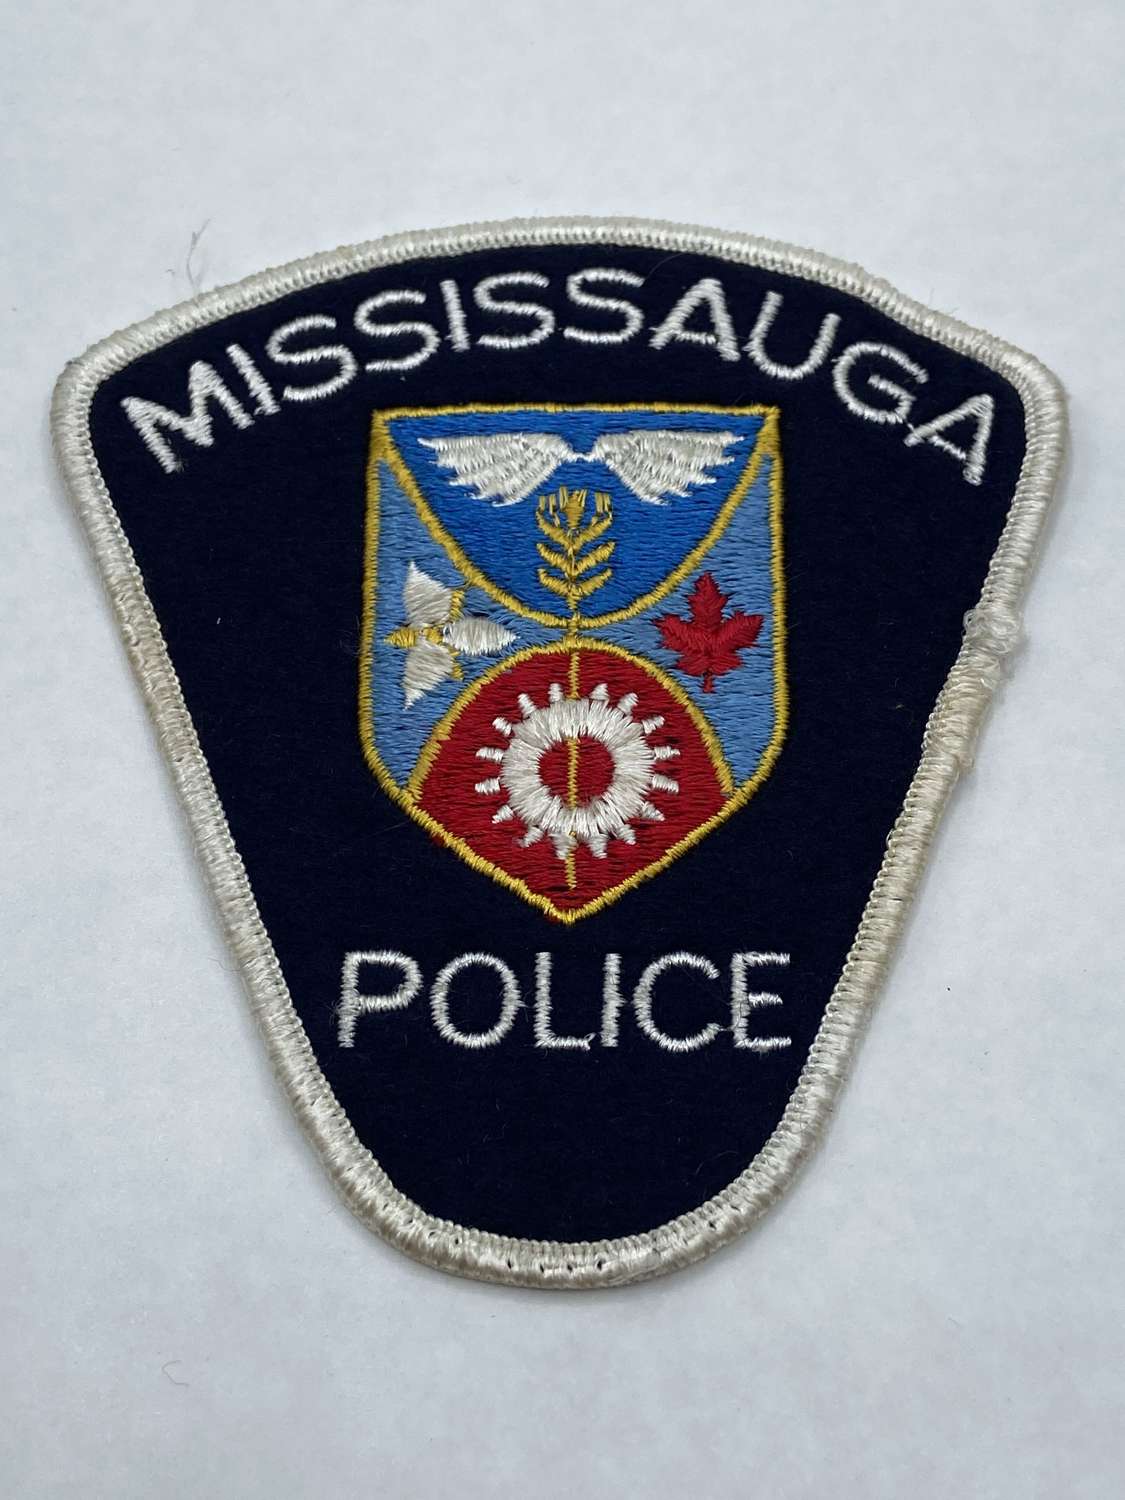 Vintage Mississauga Police Department Canada identification Patch